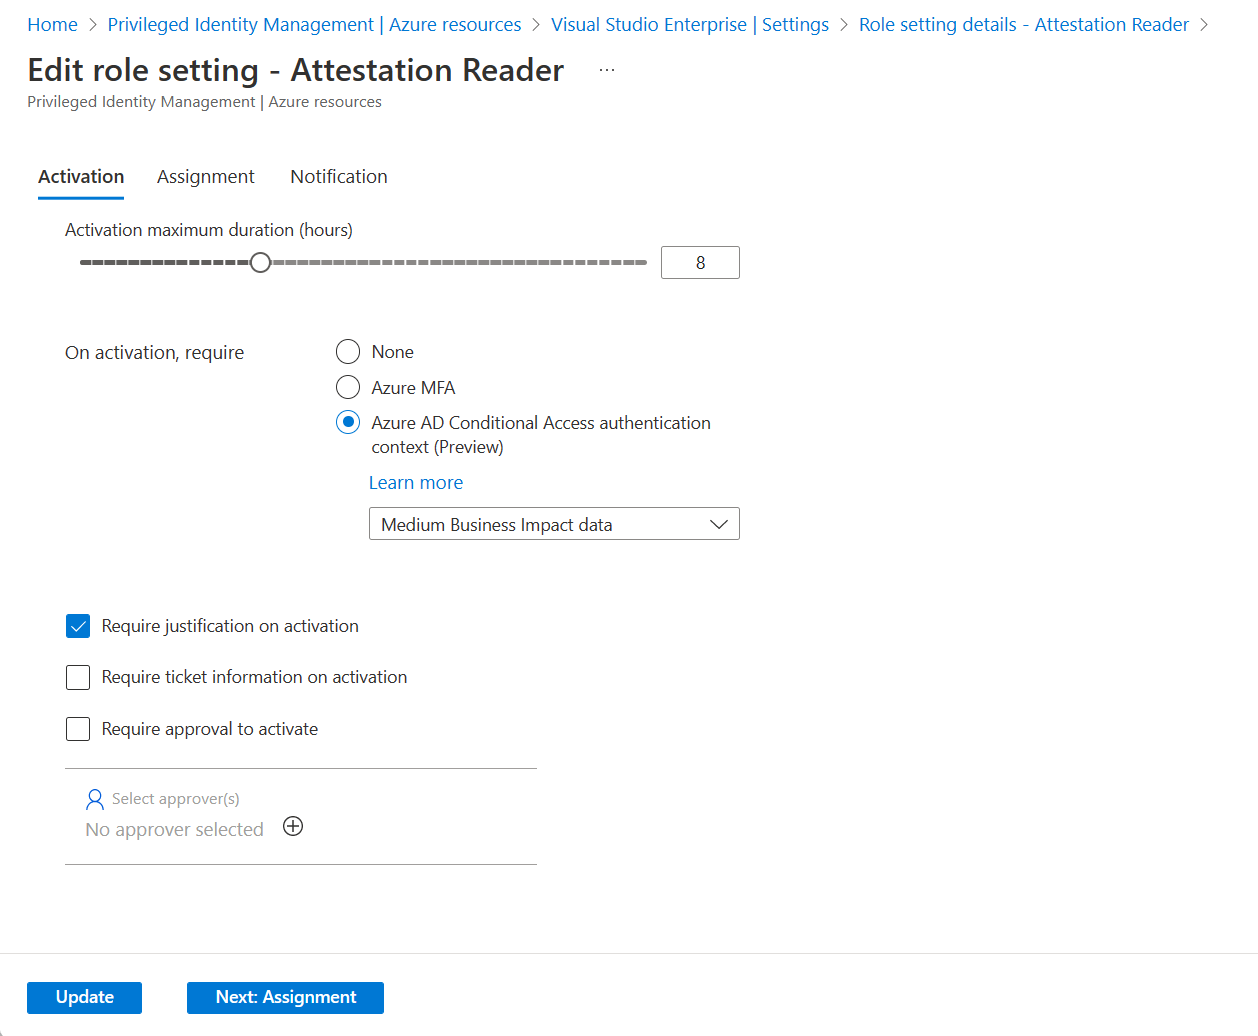 Screenshot of the Edit role settings Attestation Reader page.